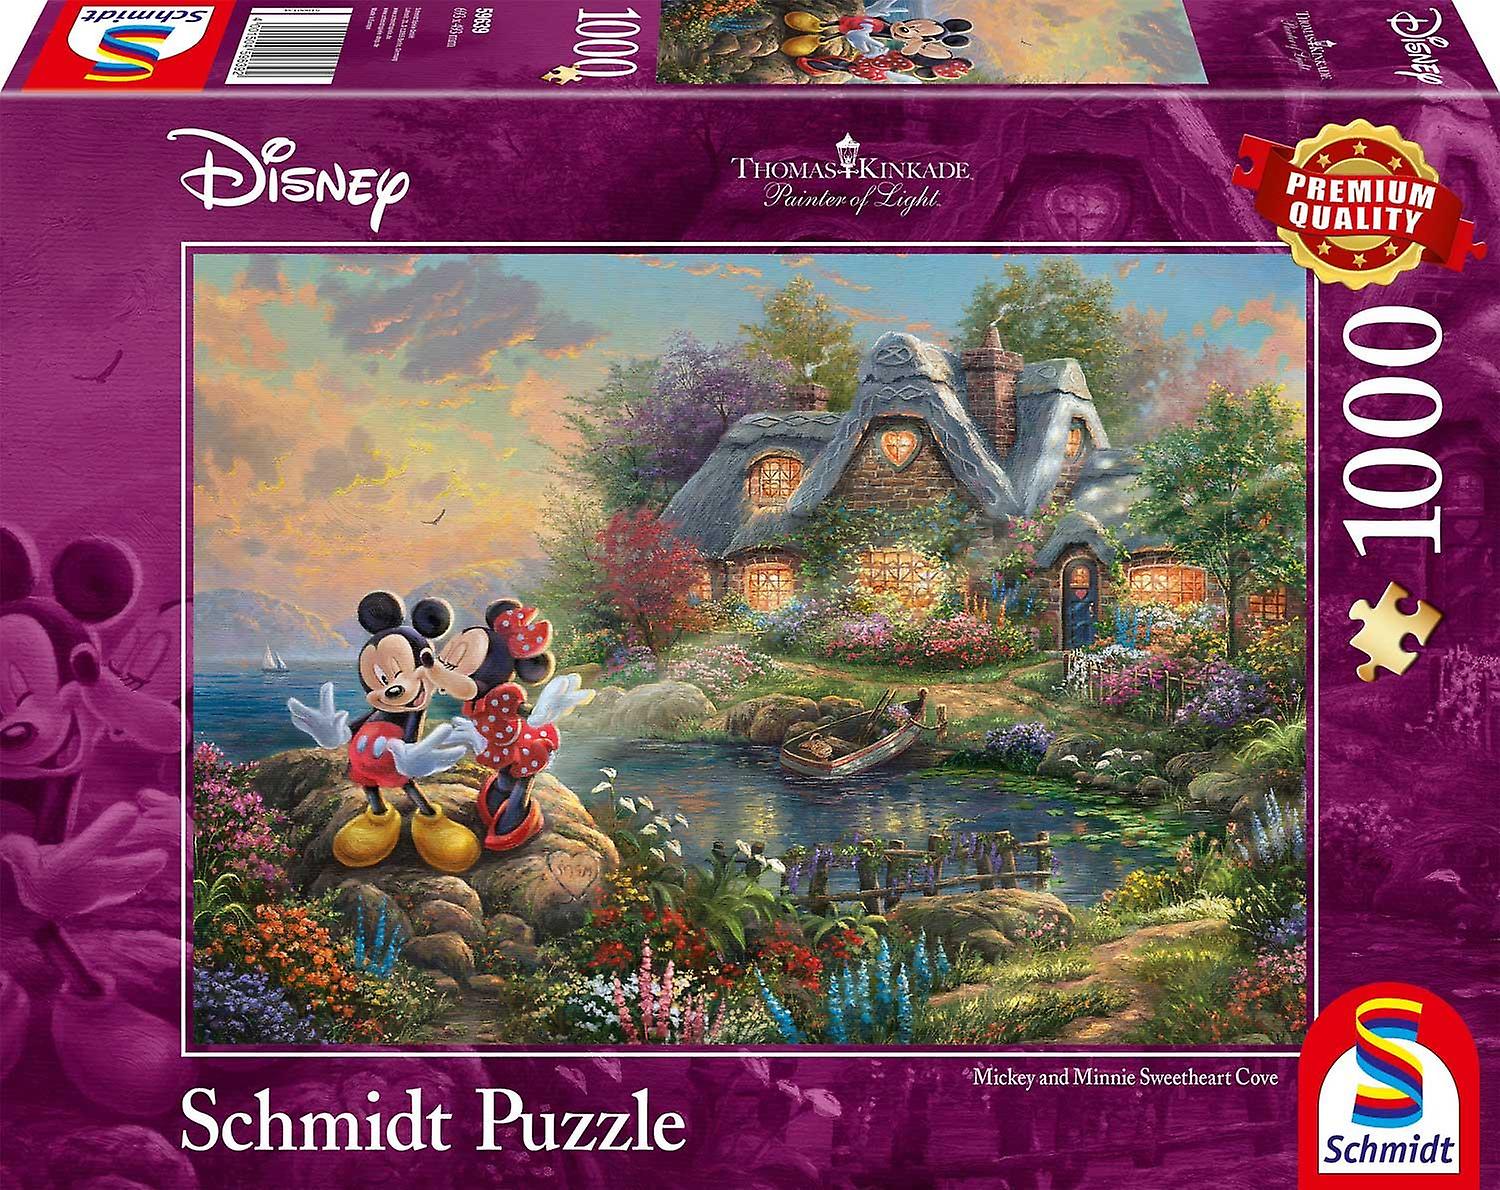 Schmidt Kinkade Disney Mickey and Minnie Mouse Sweetheart Cove Jigsaw Puzzle (1000 pieces)